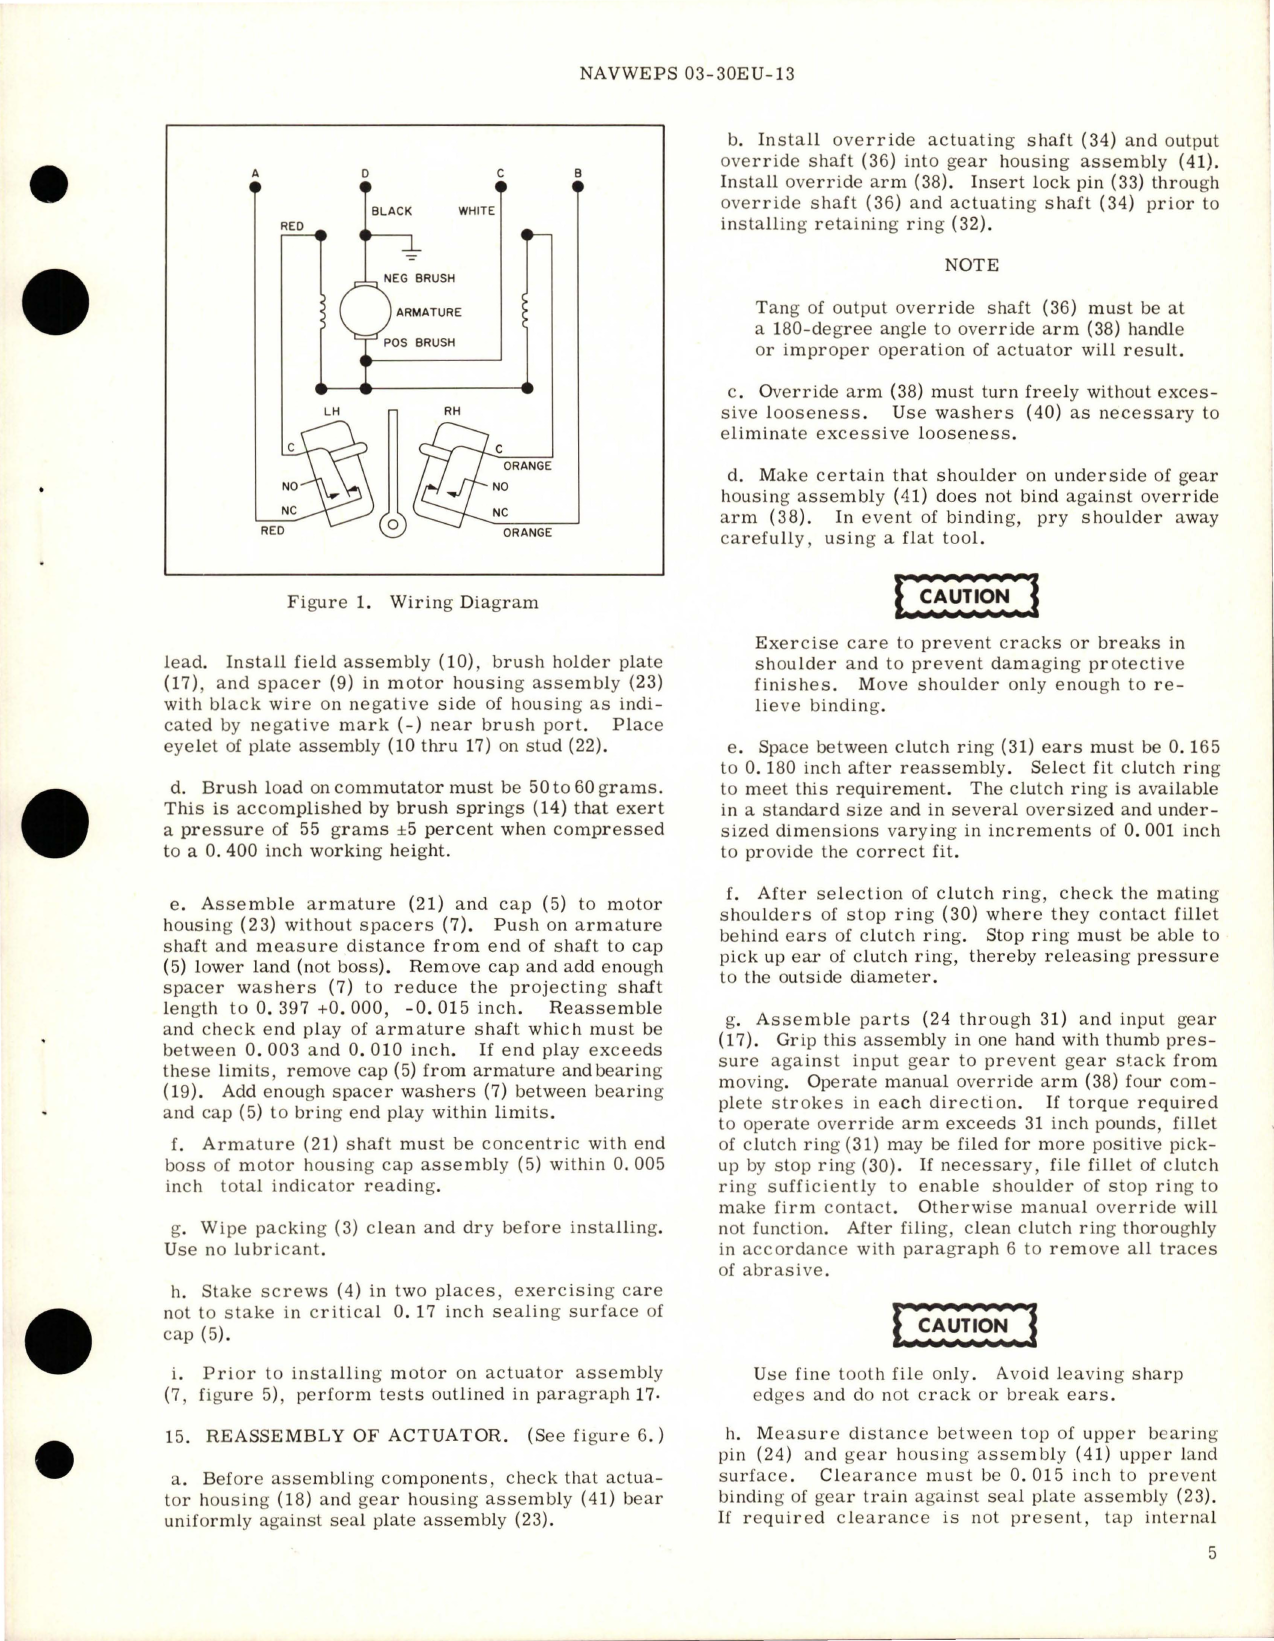 Sample page 7 from AirCorps Library document: Overhaul Instructions with Parts Breakdown for Motor Operated Gate Valve - Part AV16B1208D